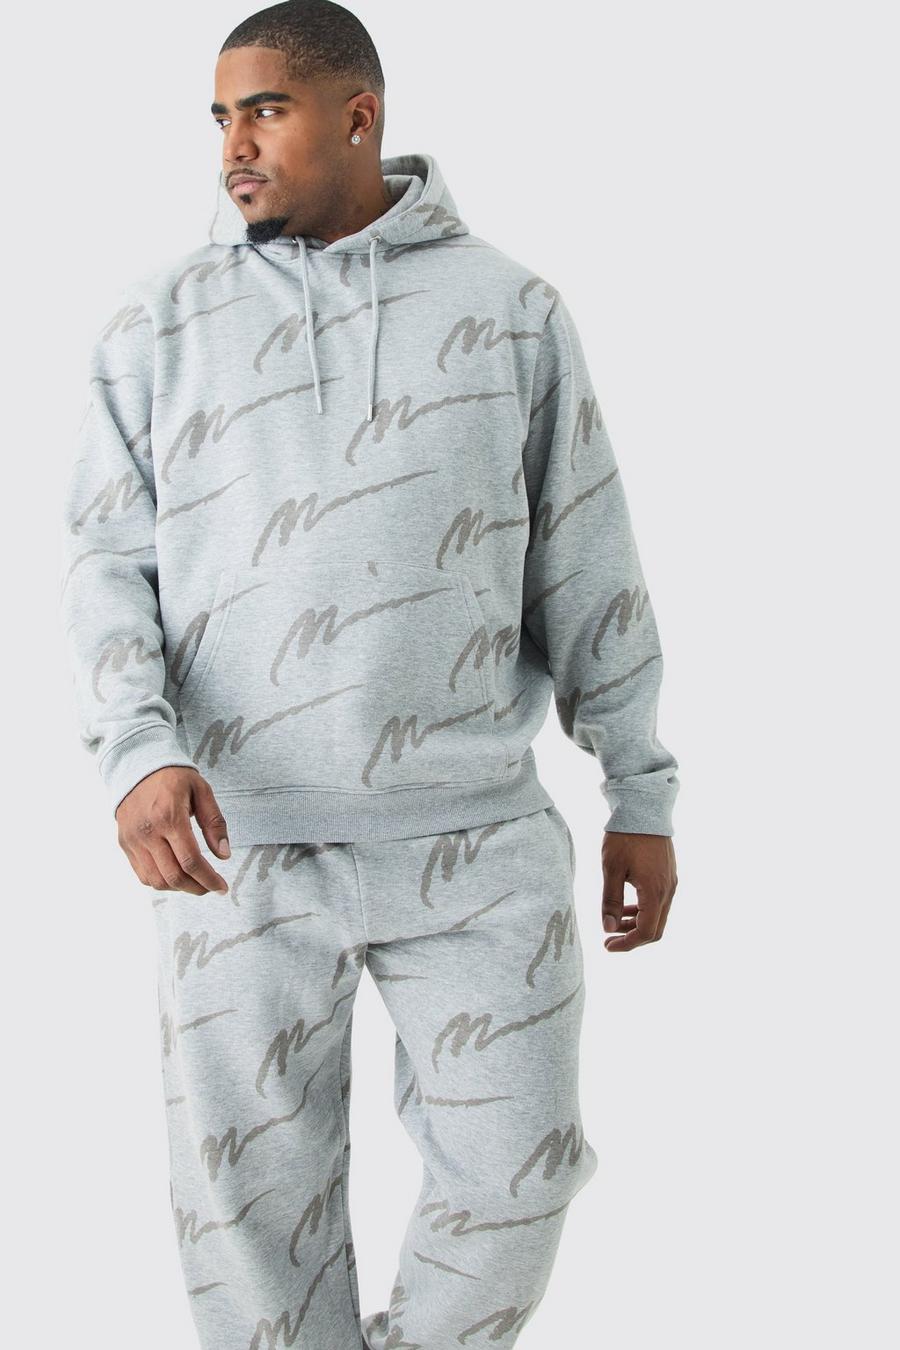 Grey marl Plus Man Signature All Over Print Hoodie Tracksuit